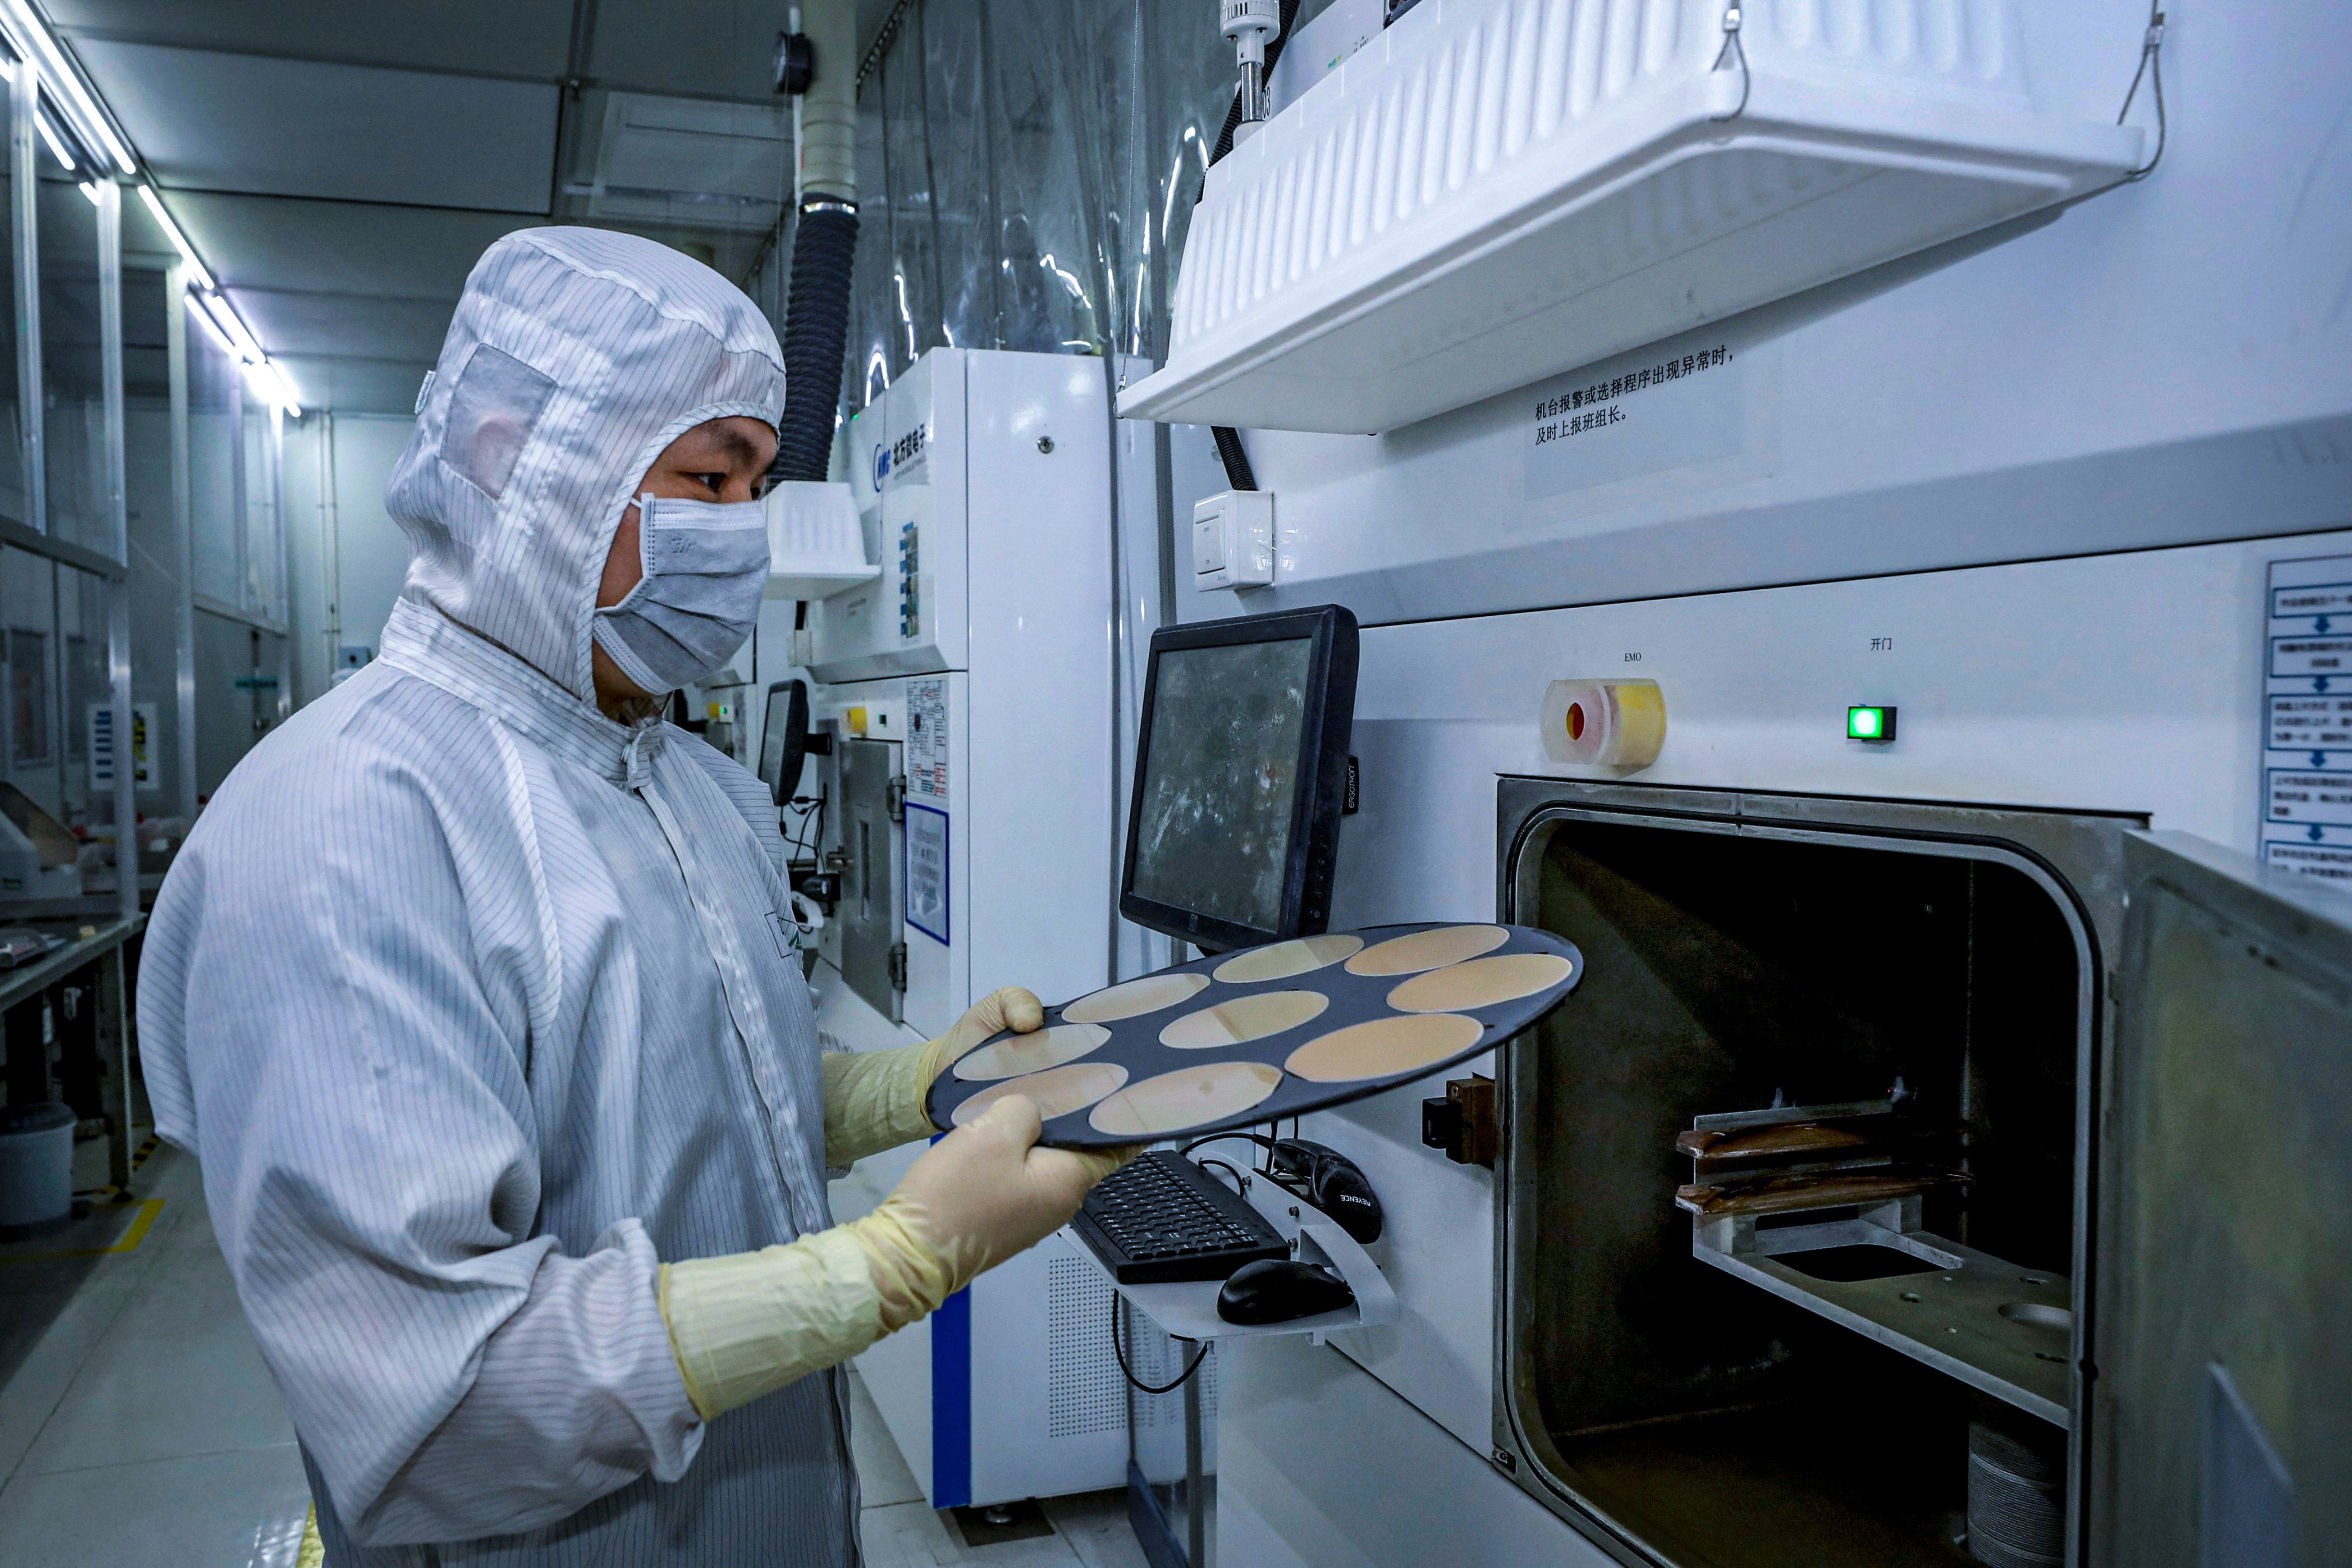 A semiconductor chips factory in eastern China’s Jiangsu province. Photo: AFP